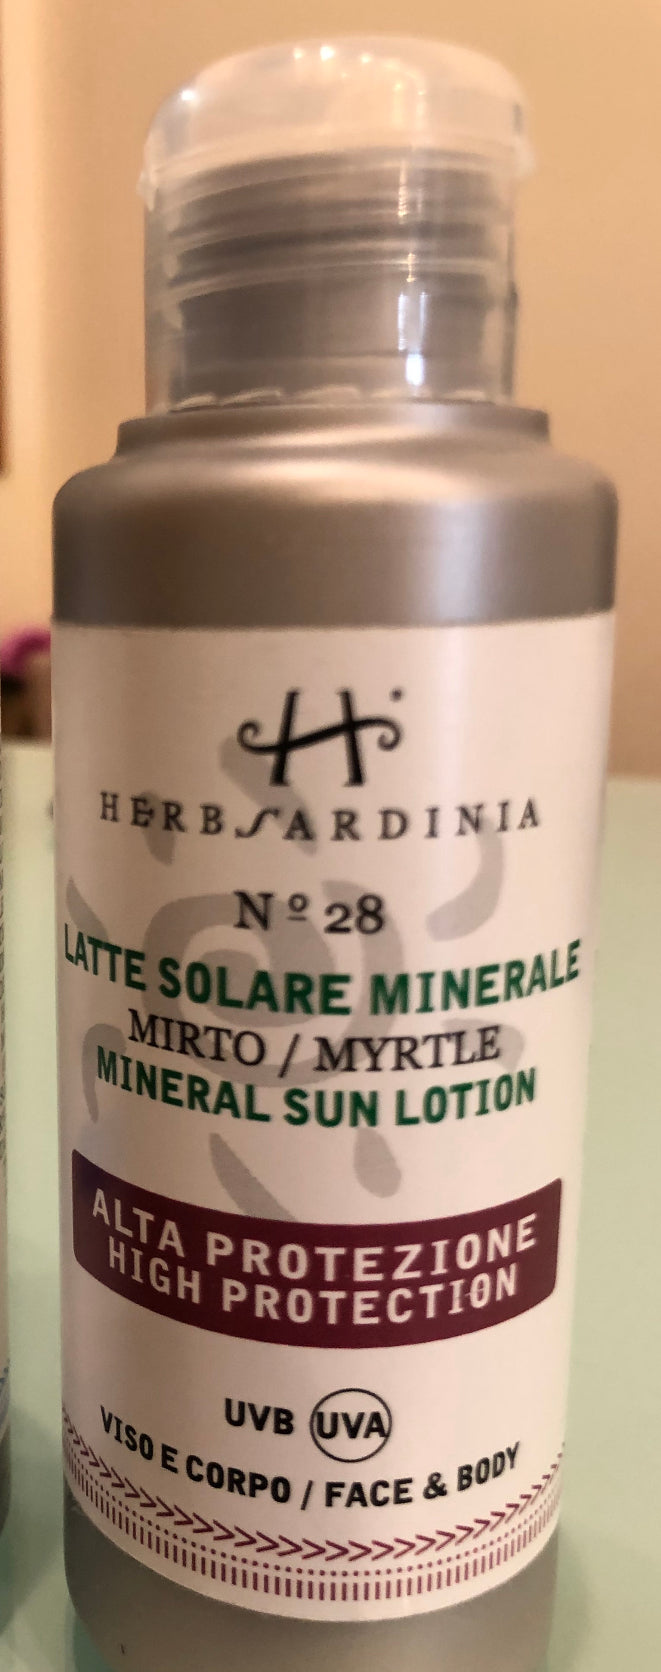 N°28 Mineral Sun Lotion Myrtle Hight Protection Suncreen